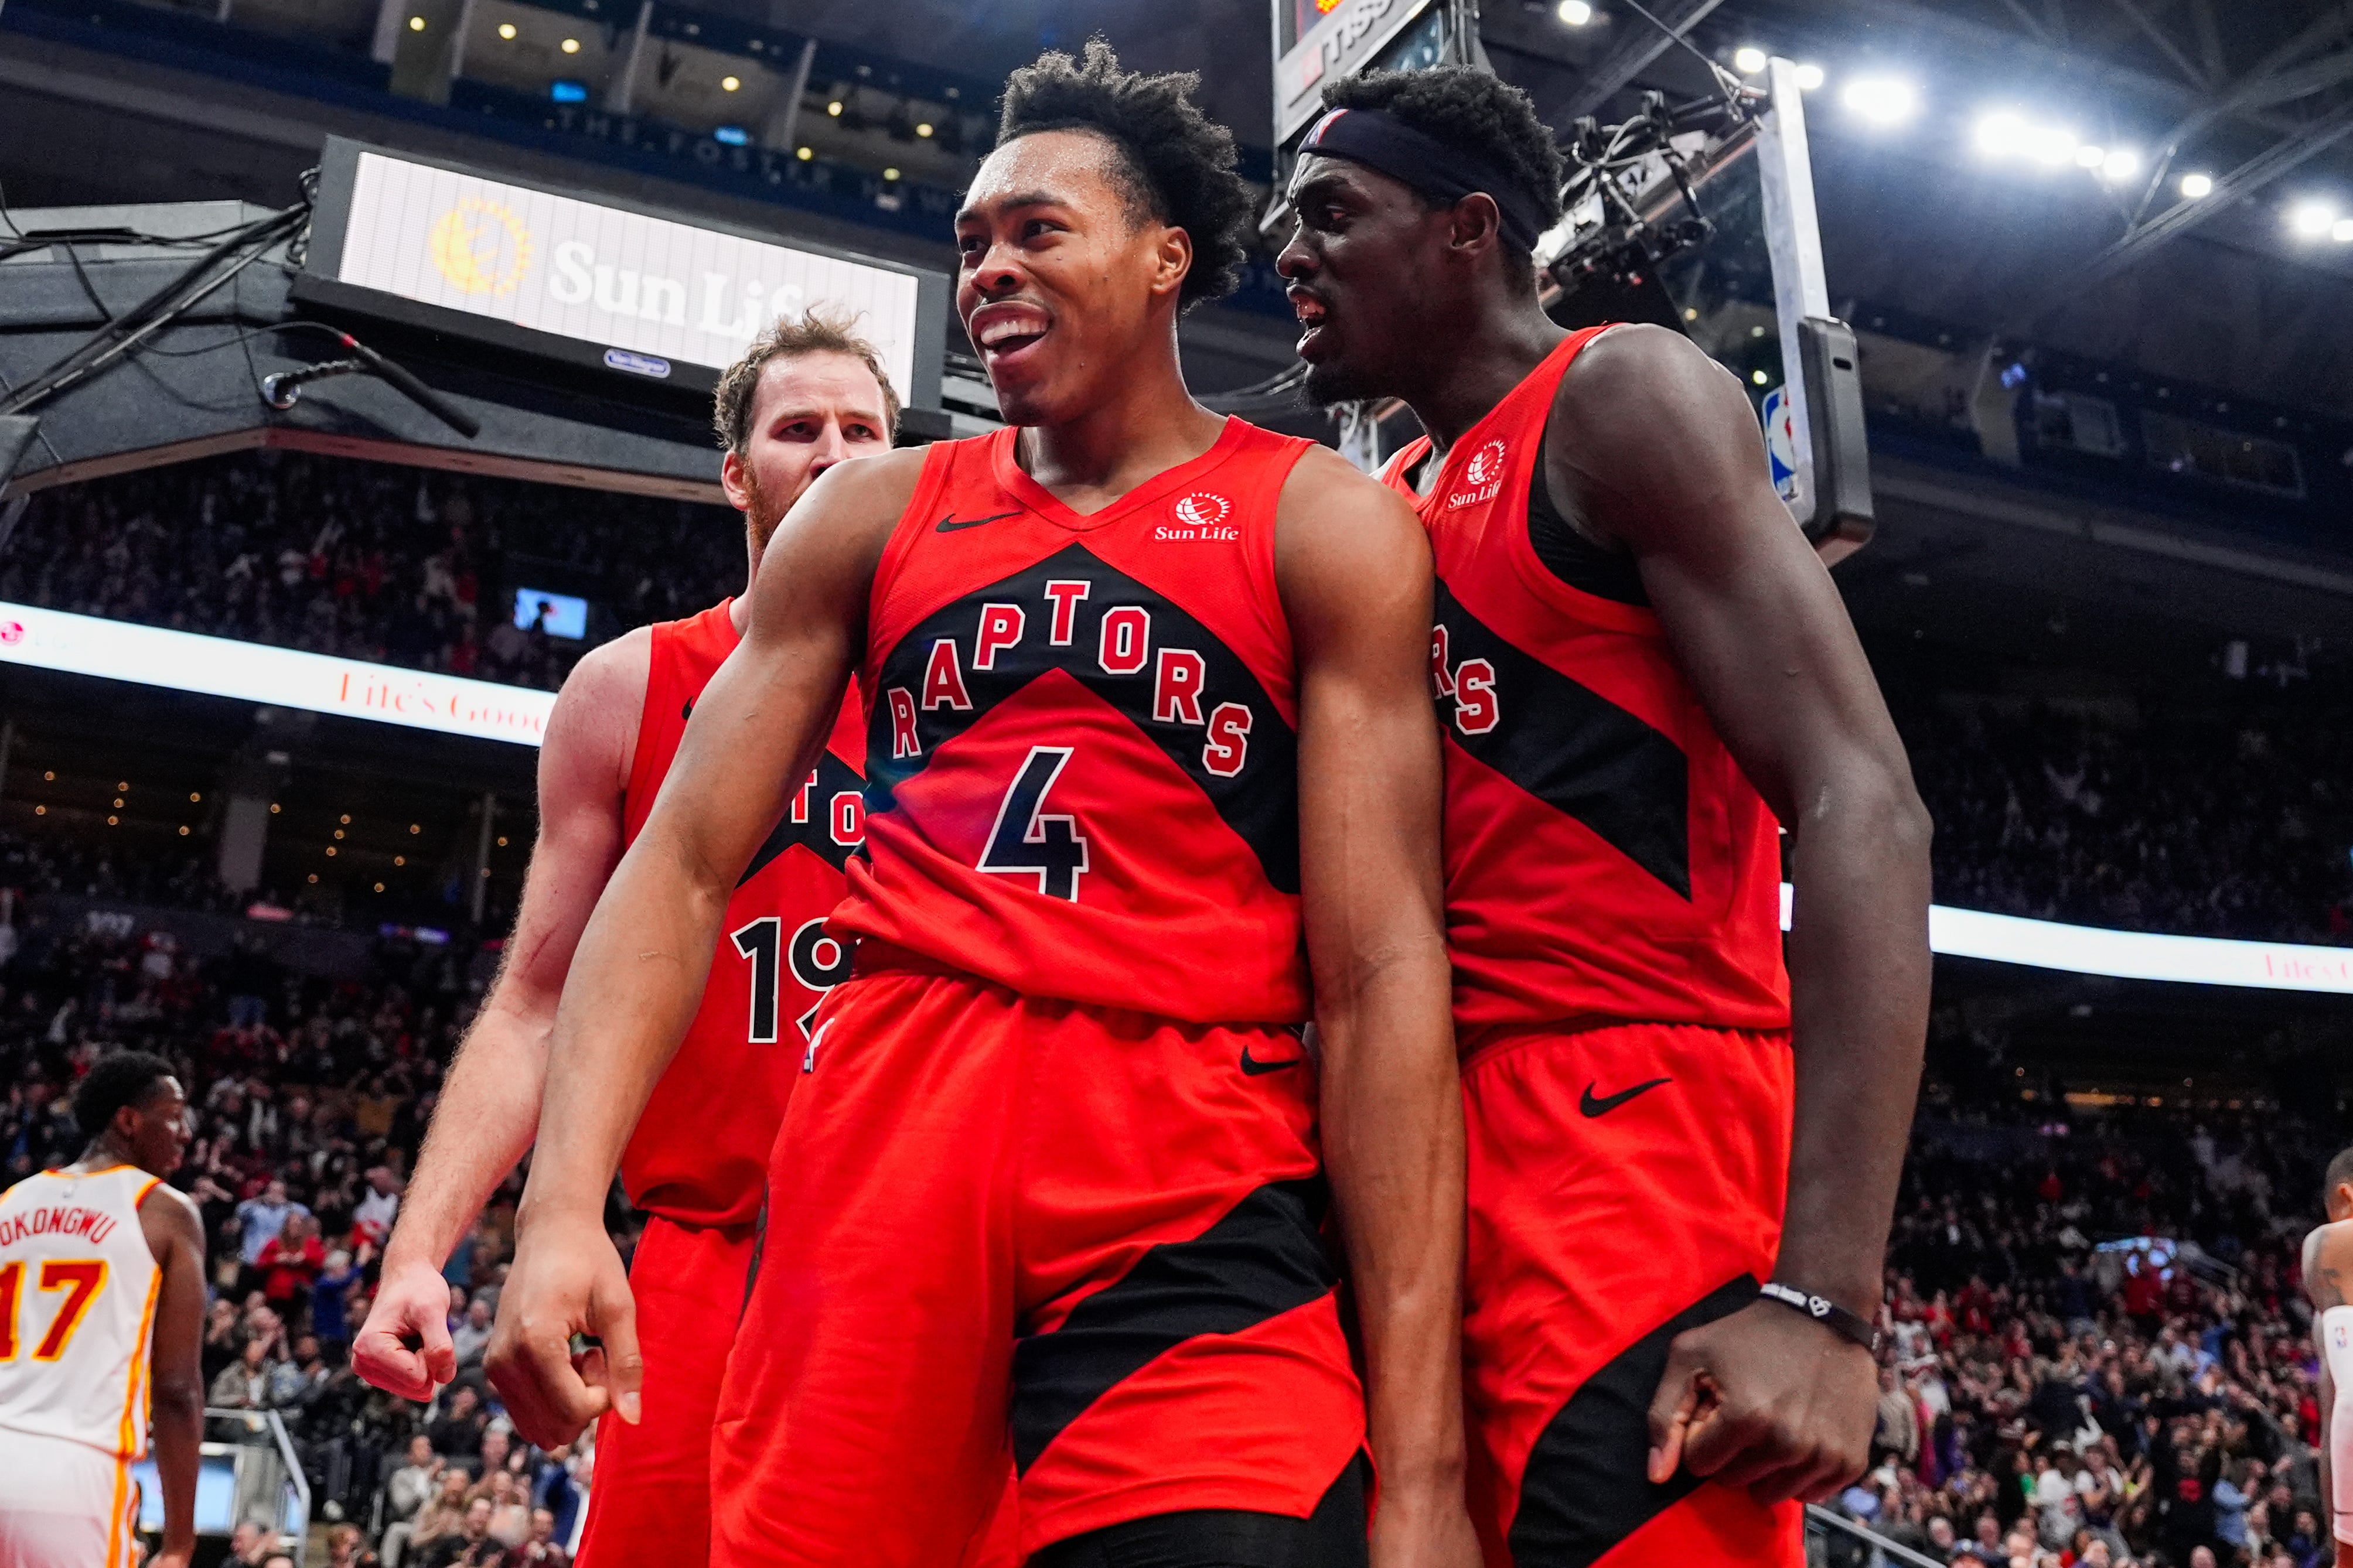 Raptors' OG Anunoby becoming an All-Star lock due to hot start